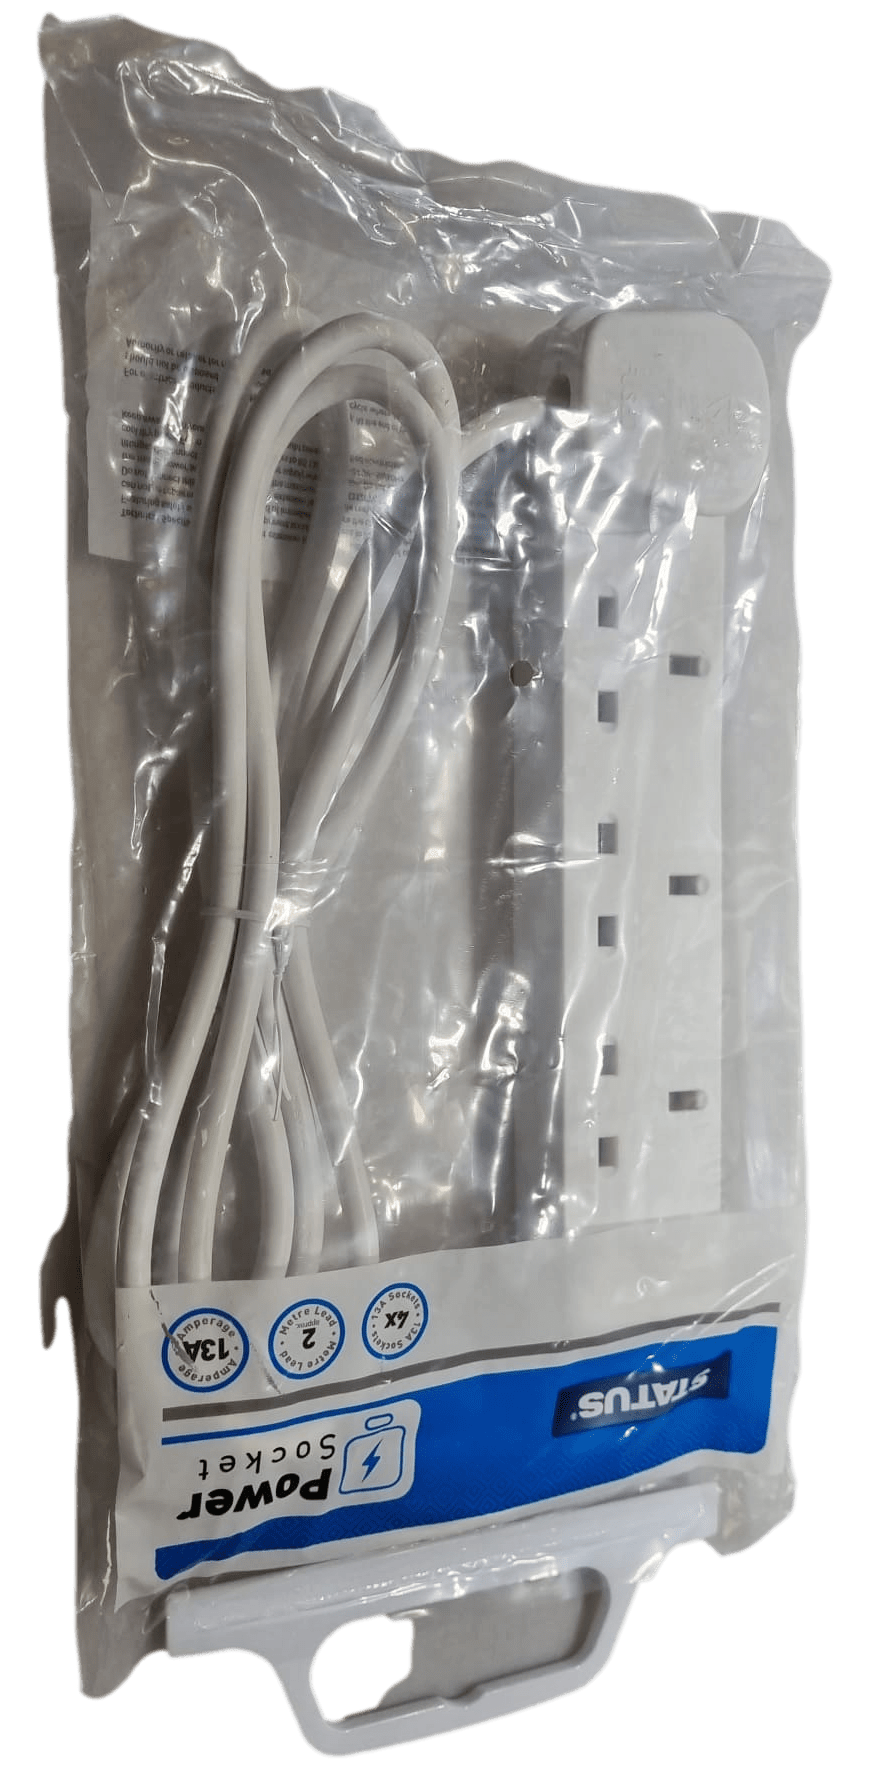 4 Way UK 3 Pin Plug Surge Protected Extension Lead 2 Metre 4WS2M20 A  (Parcel Rate)